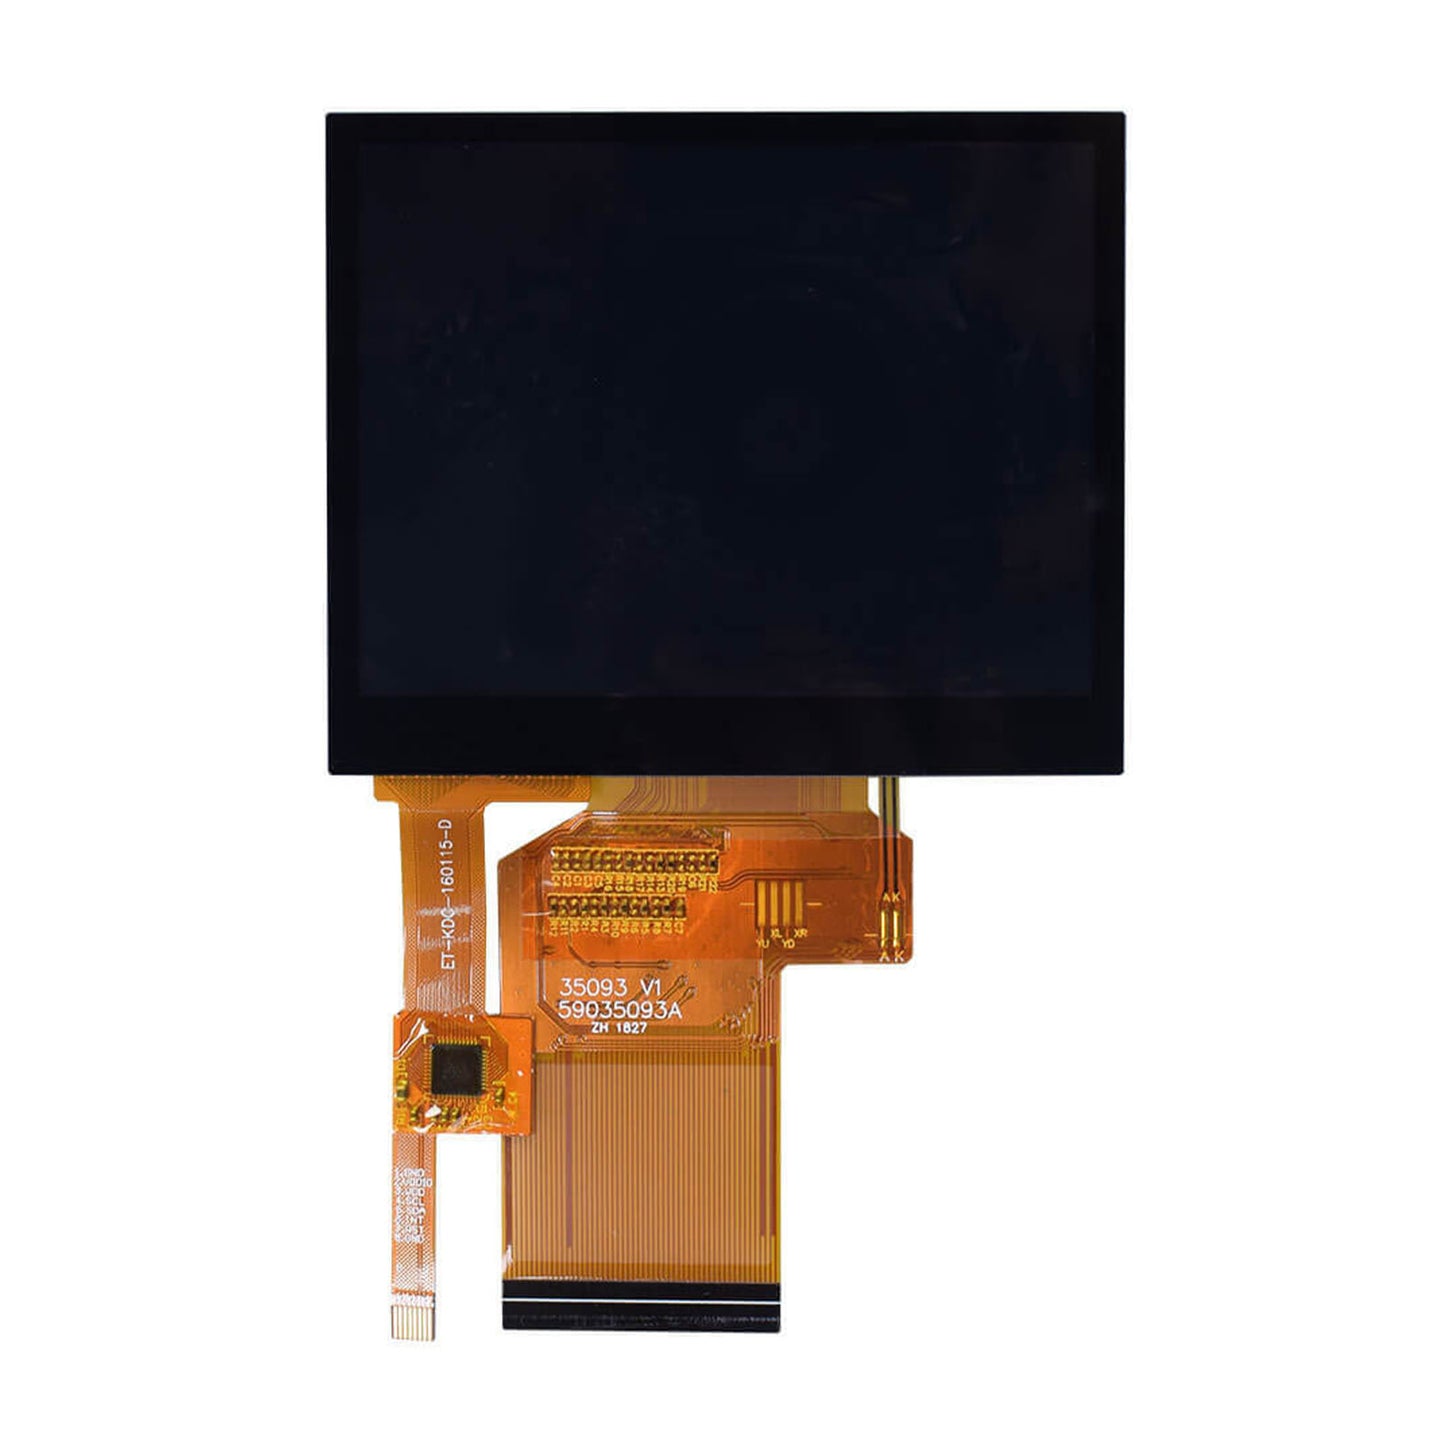 DisplayModule 3.5" IPS 320x240 Display Panel With Capacitive Touch - RGB